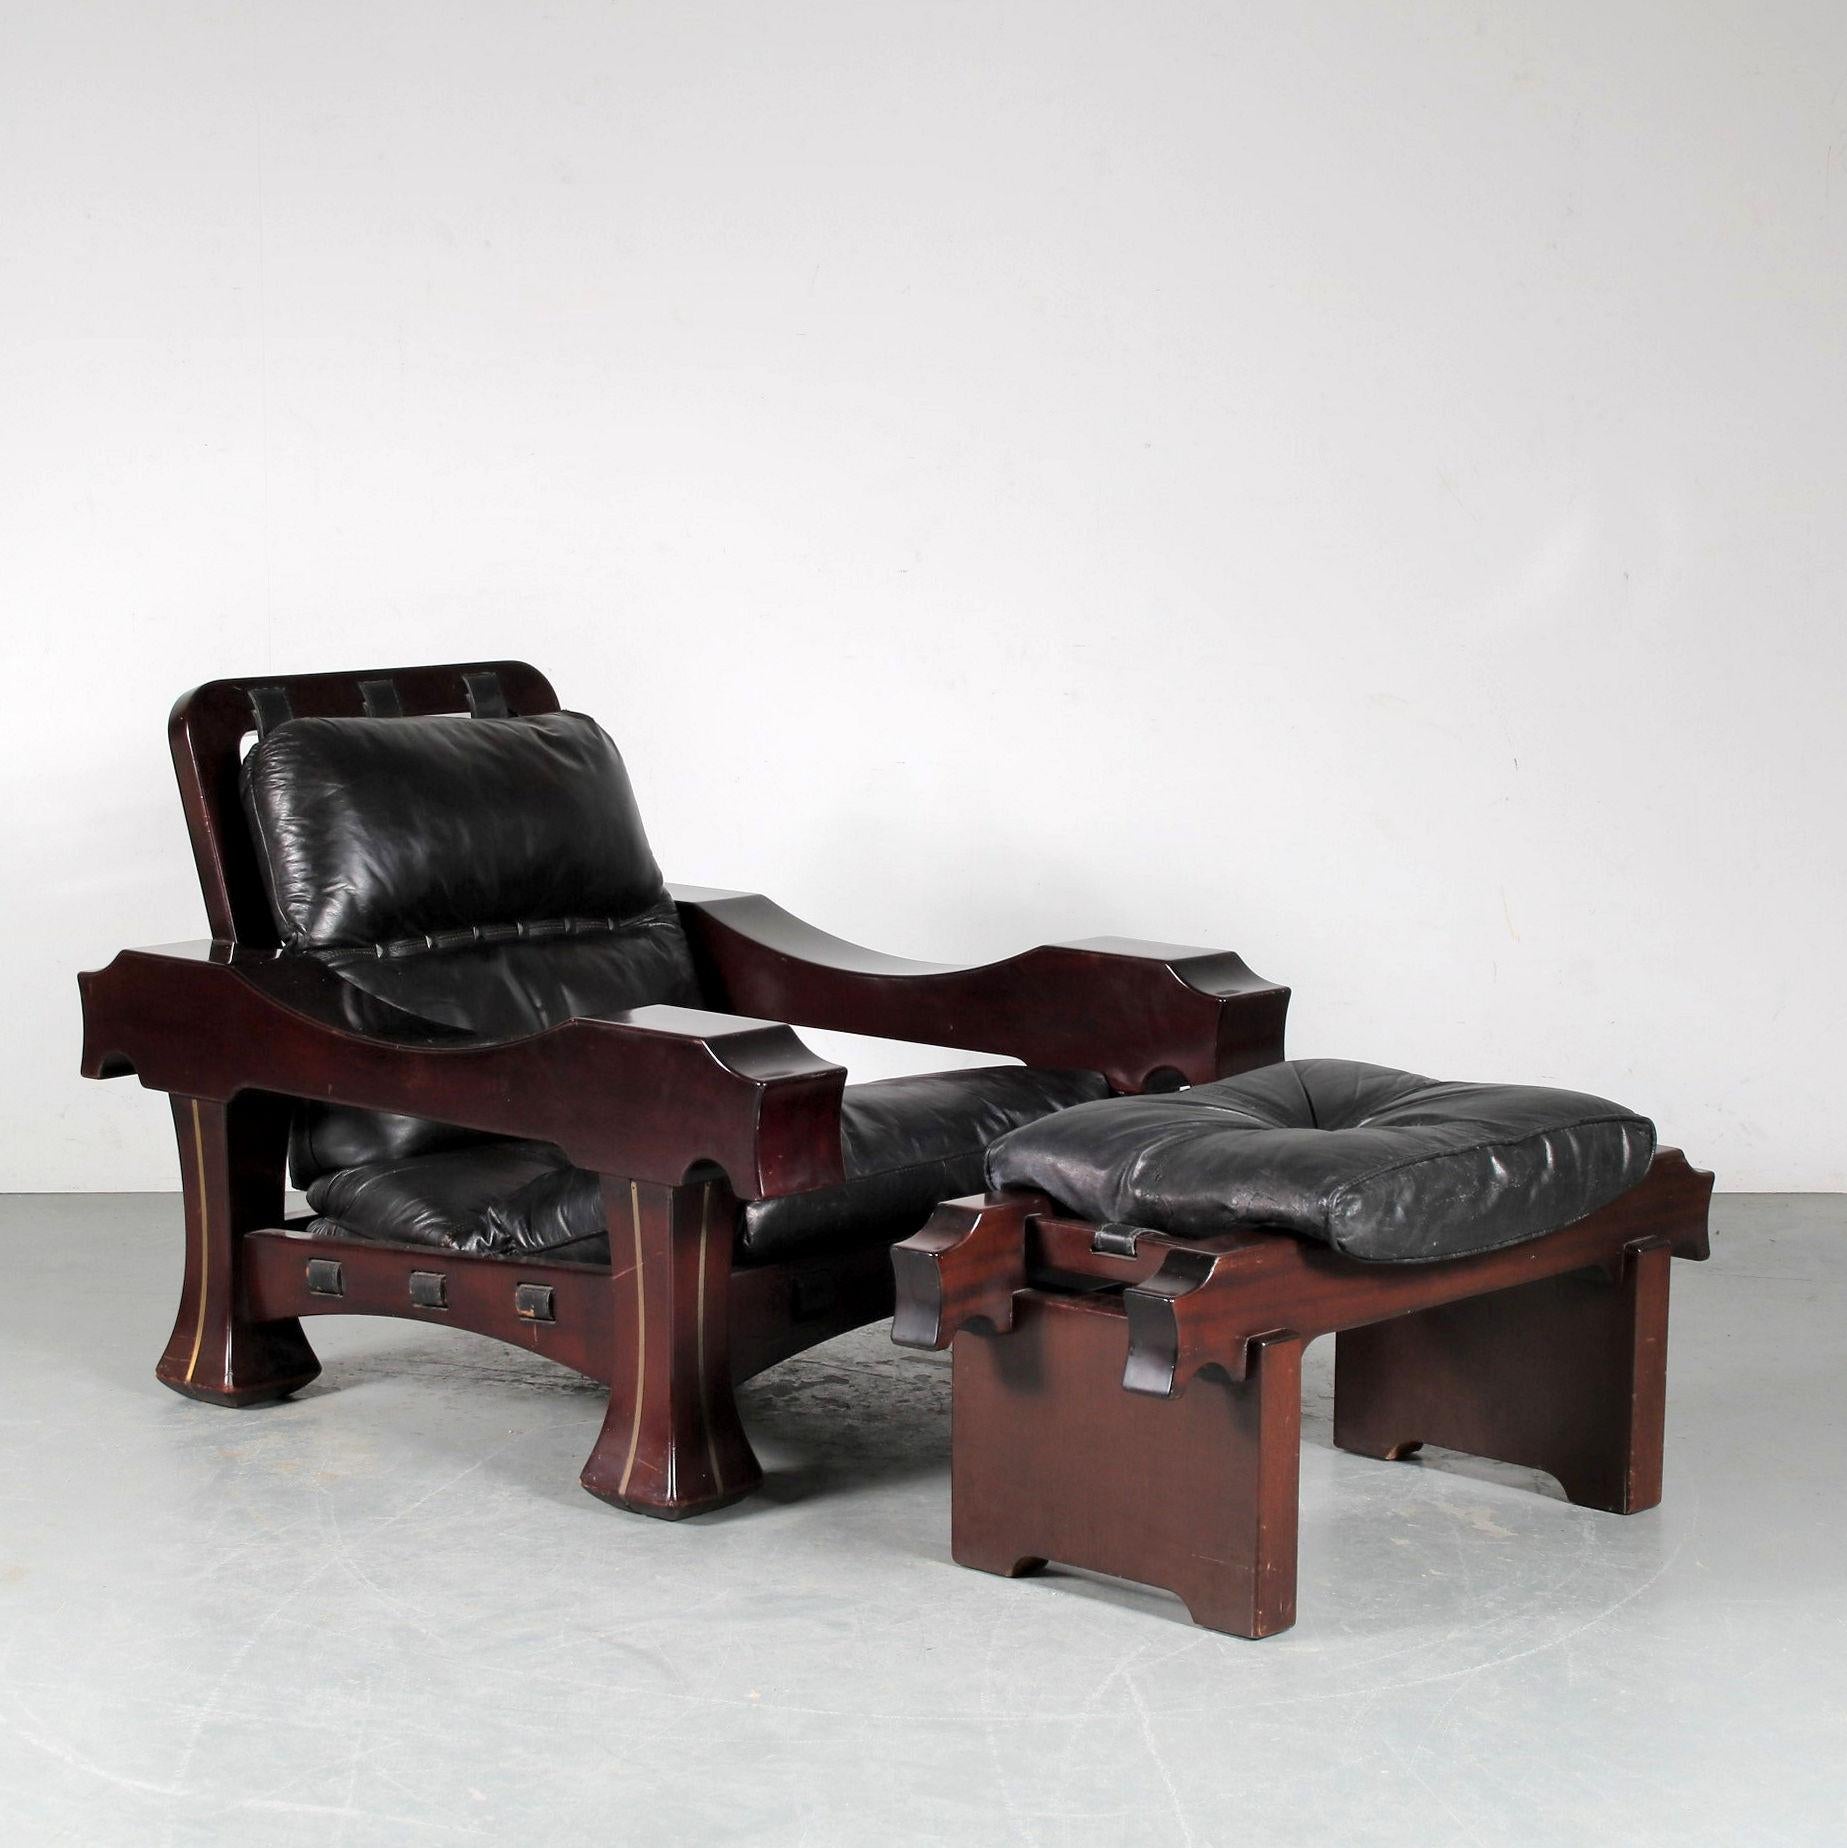 An eye-catching lounge chair designed by Luciano Frigerio, manufactured in Italy around 1970.

The deep brown color of the mahogany wood fits this eye-catching set really well. The cushions of the chair and stool are all upholstered in high